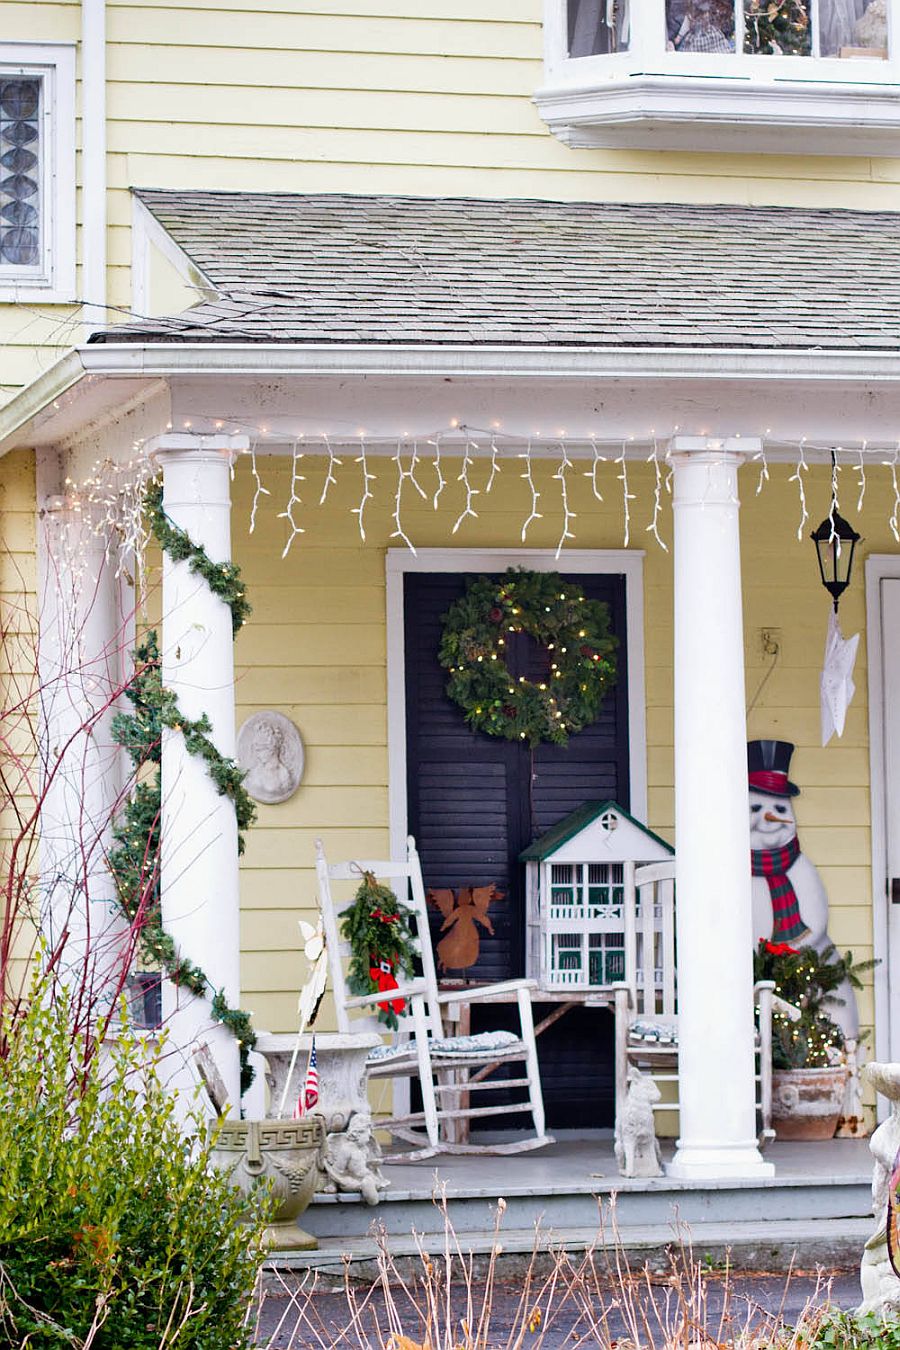 Snowman-string-lighting-and-a-holiday-wreath-transform-this-small-porch-area-into-a-festive-space